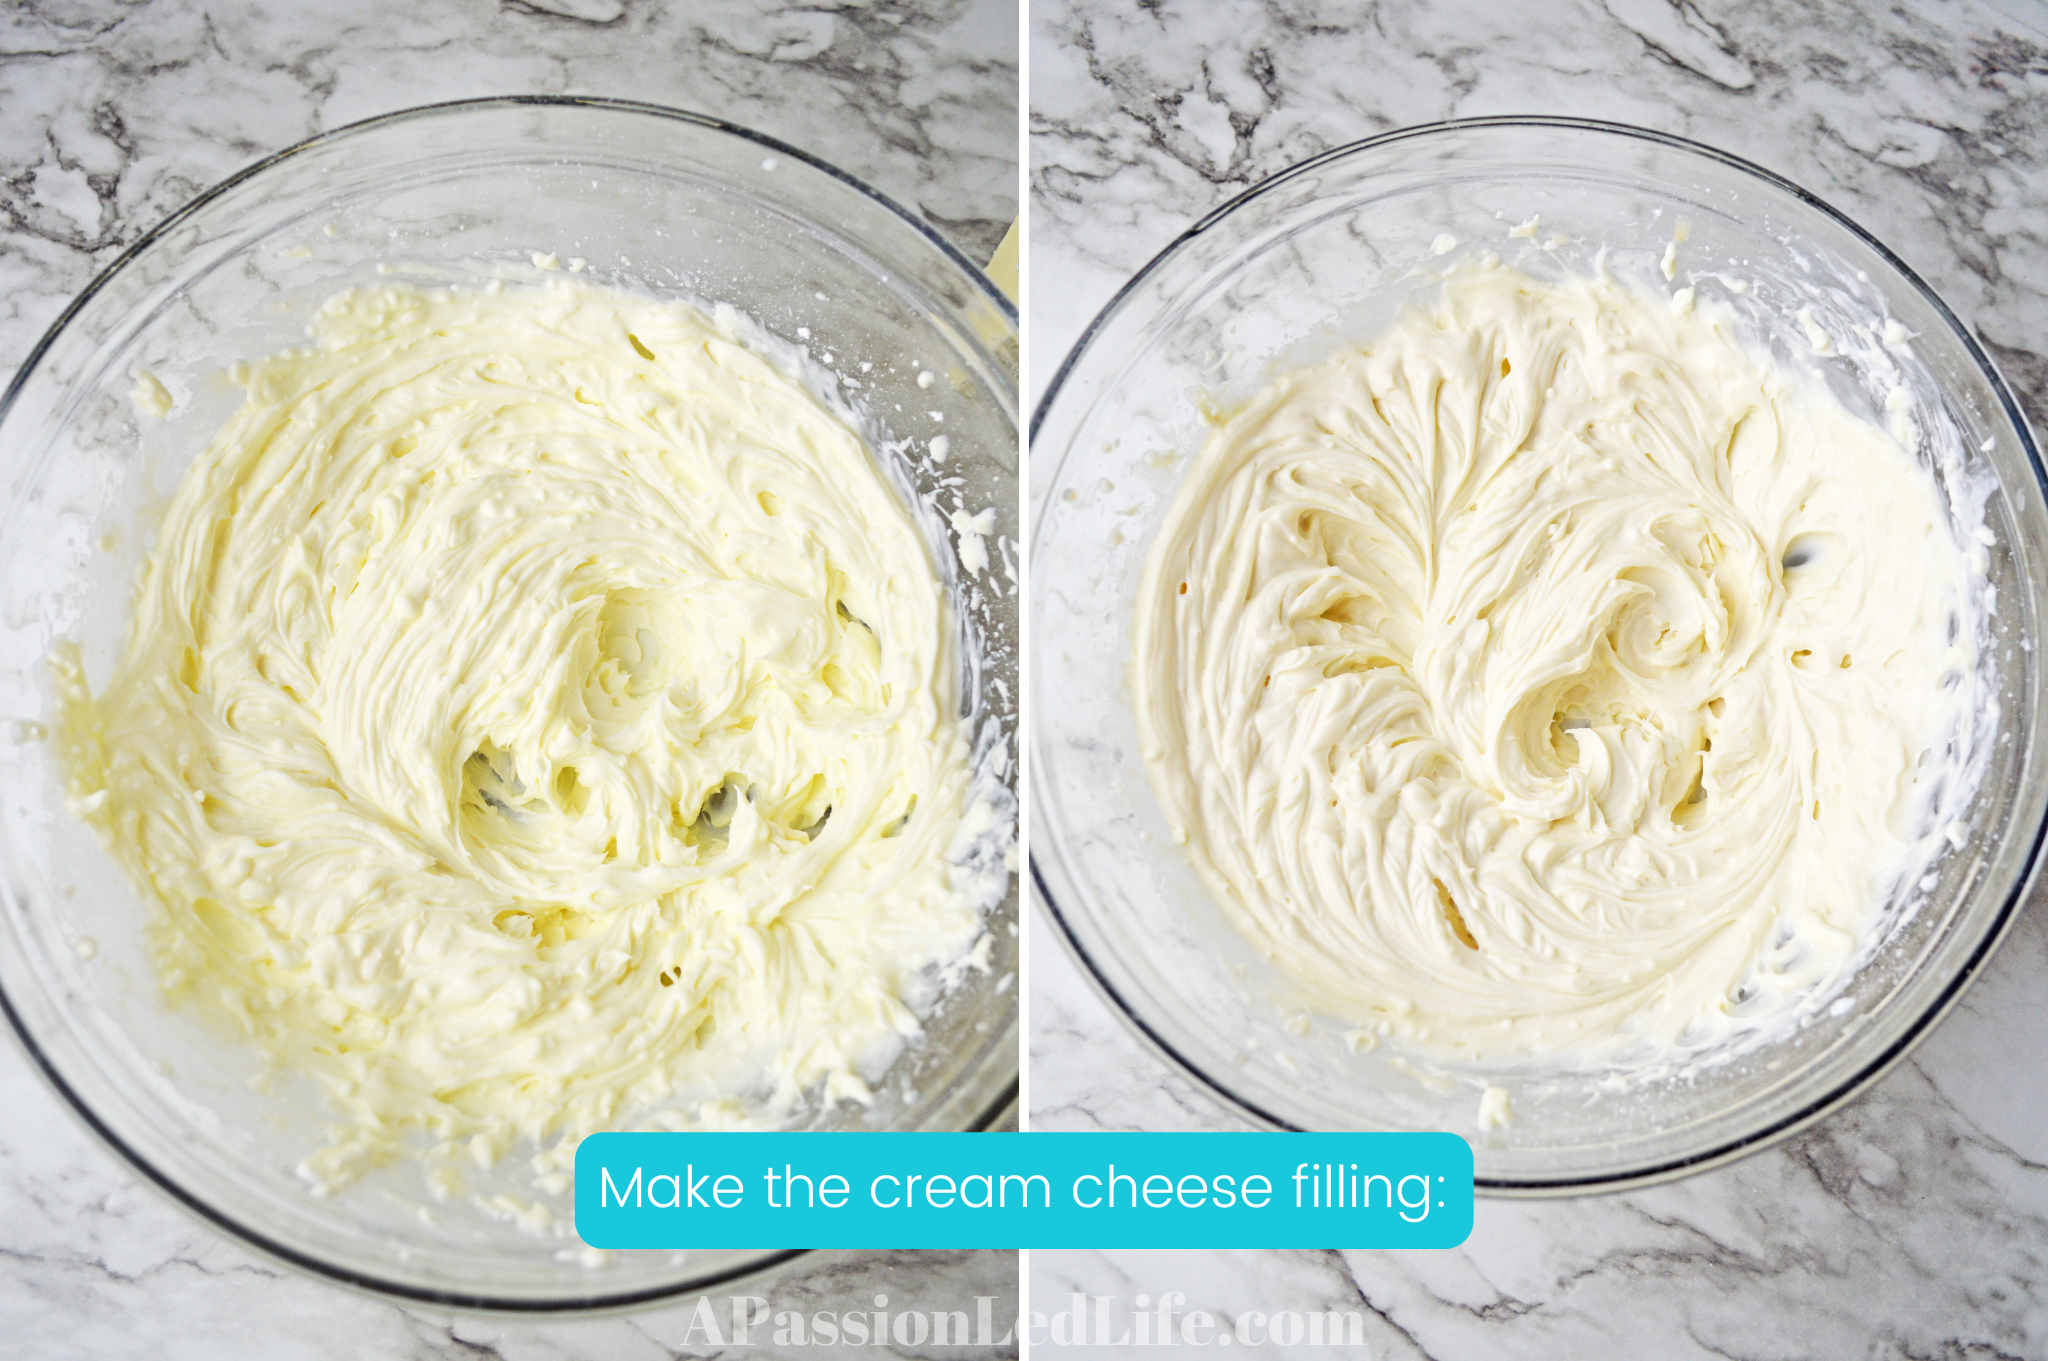 two photos showing the process of making cream cheese filling